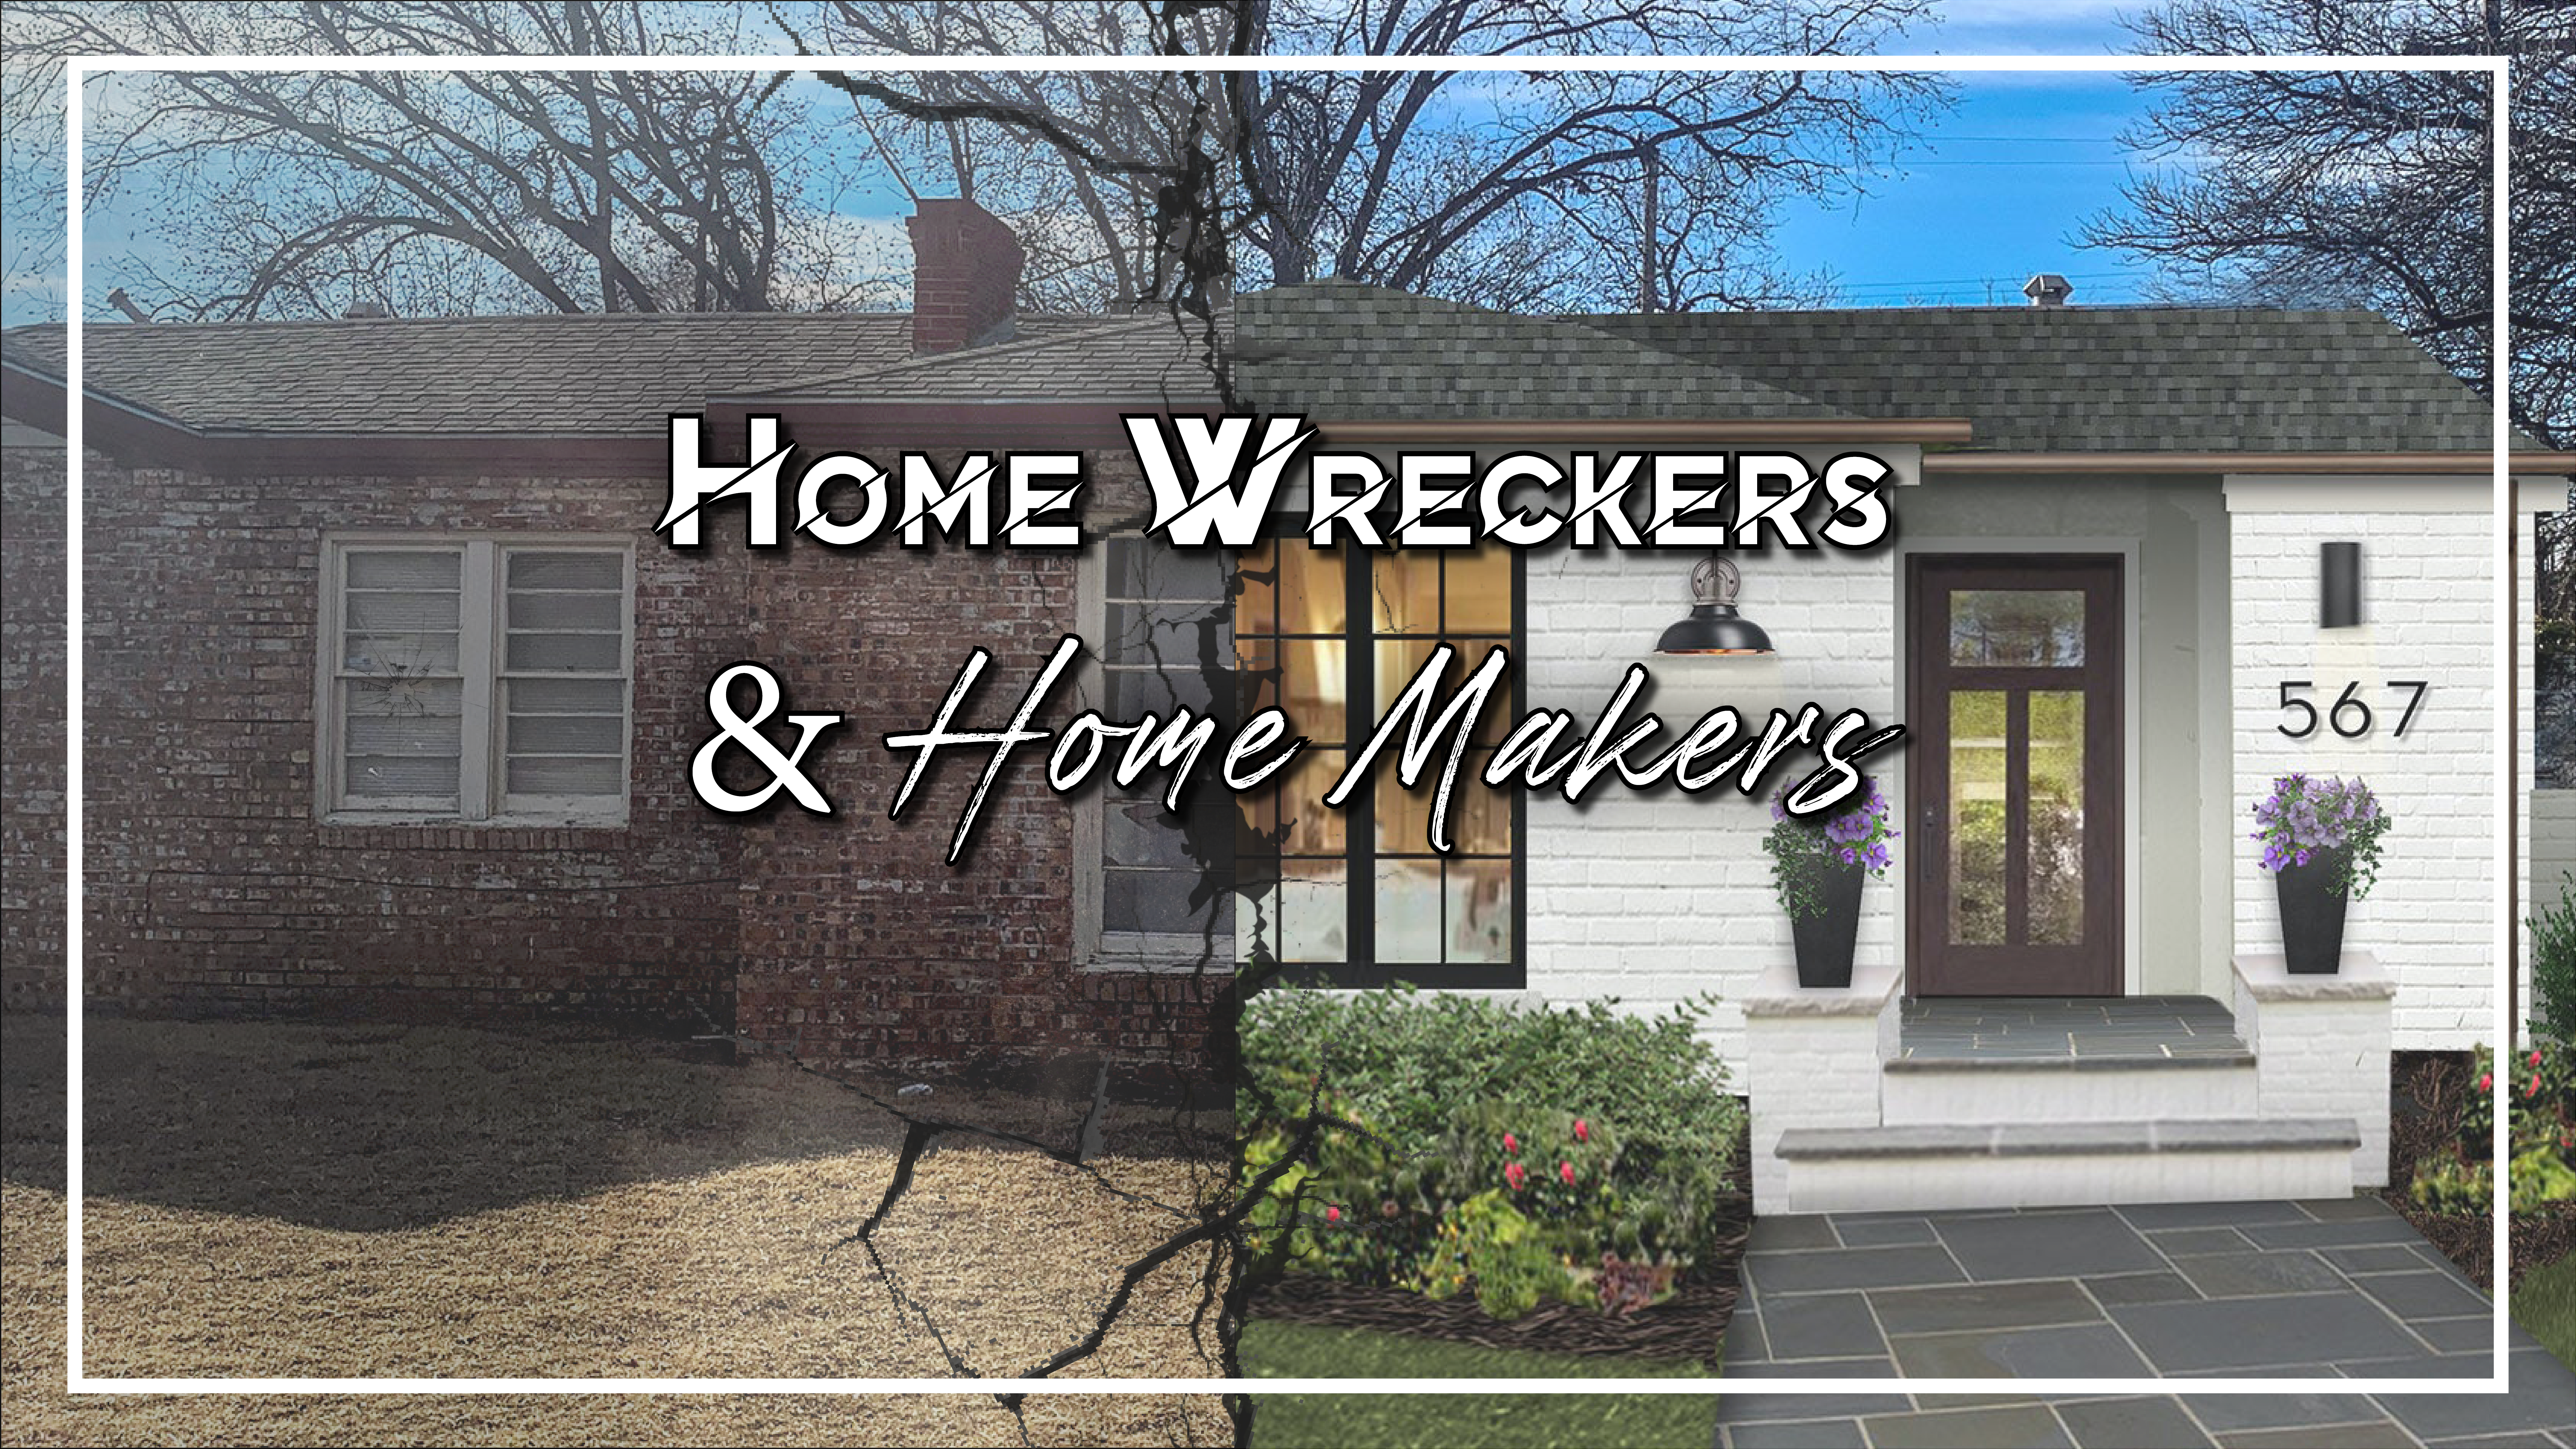 Home Wreckers & Home Makers